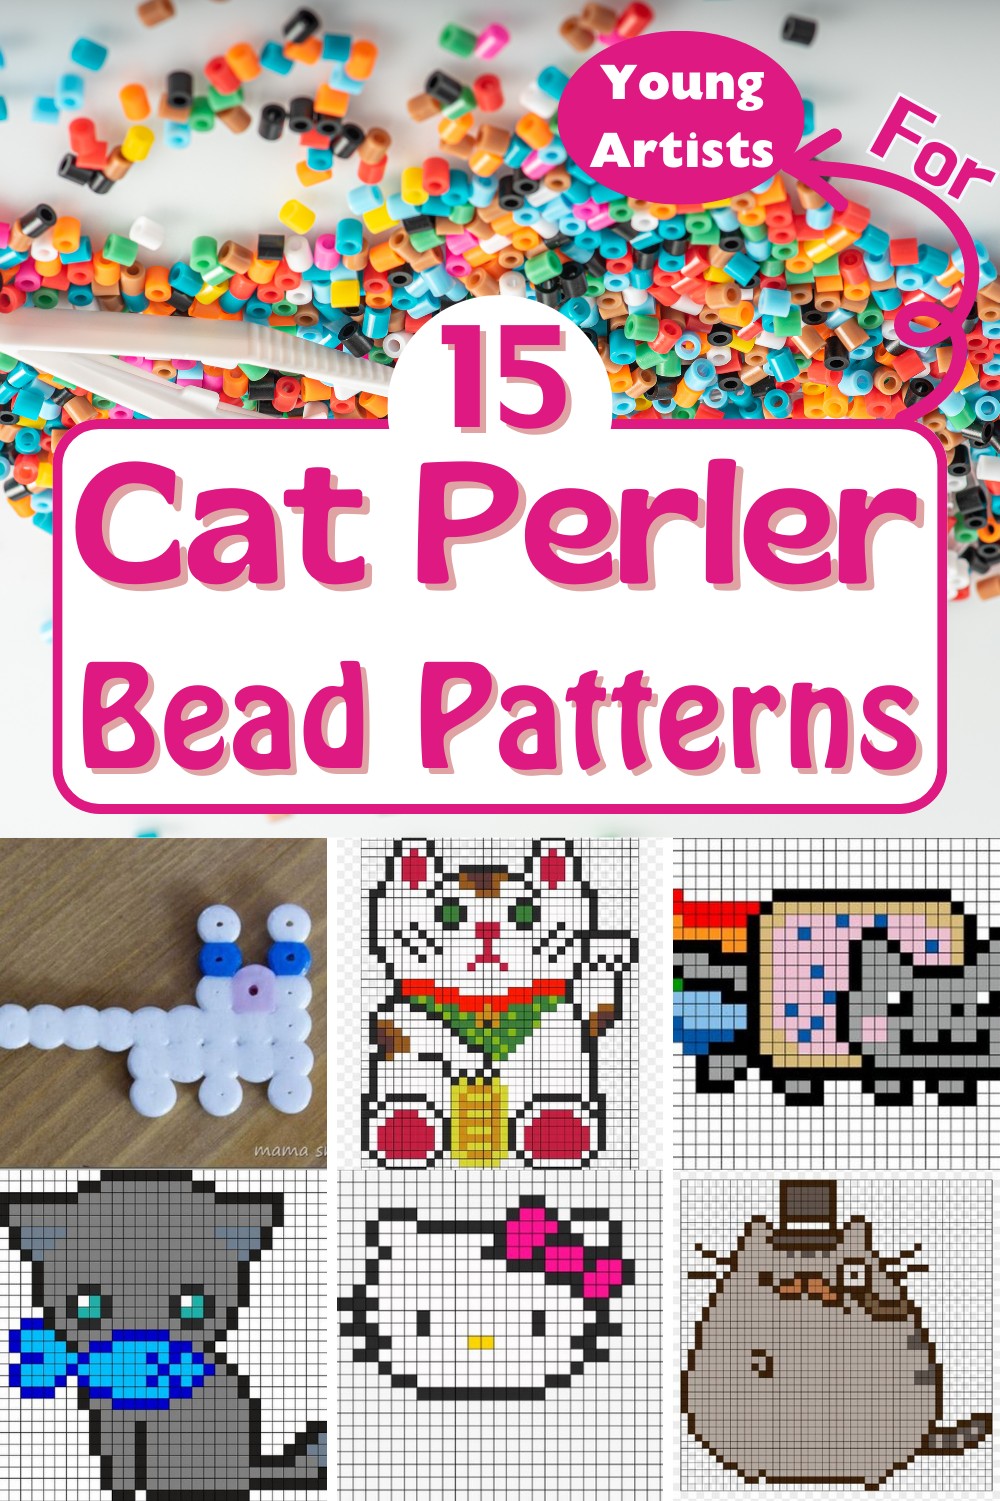 15 Cat Perler Beads For Young Artists